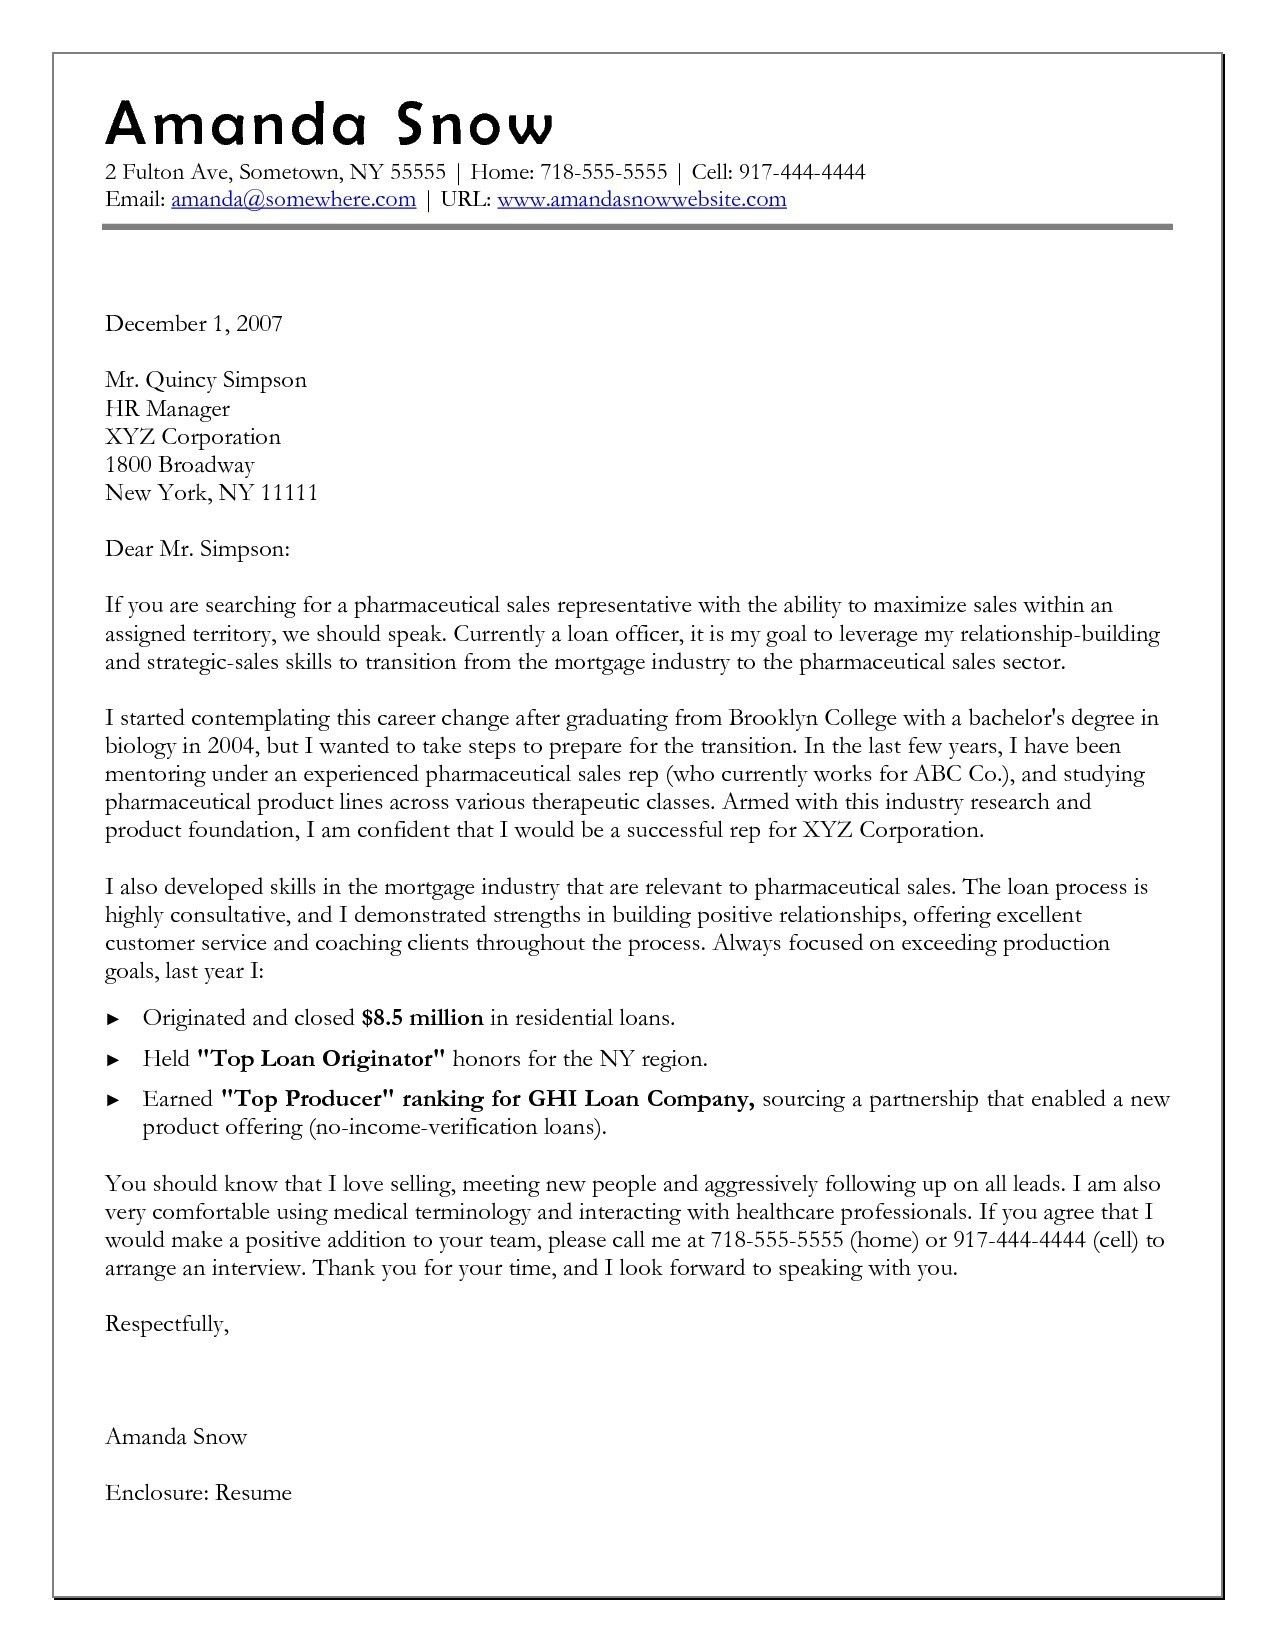 23 Cover Letter Career Change Cover Letter For Resume intended for dimensions 1275 X 1650